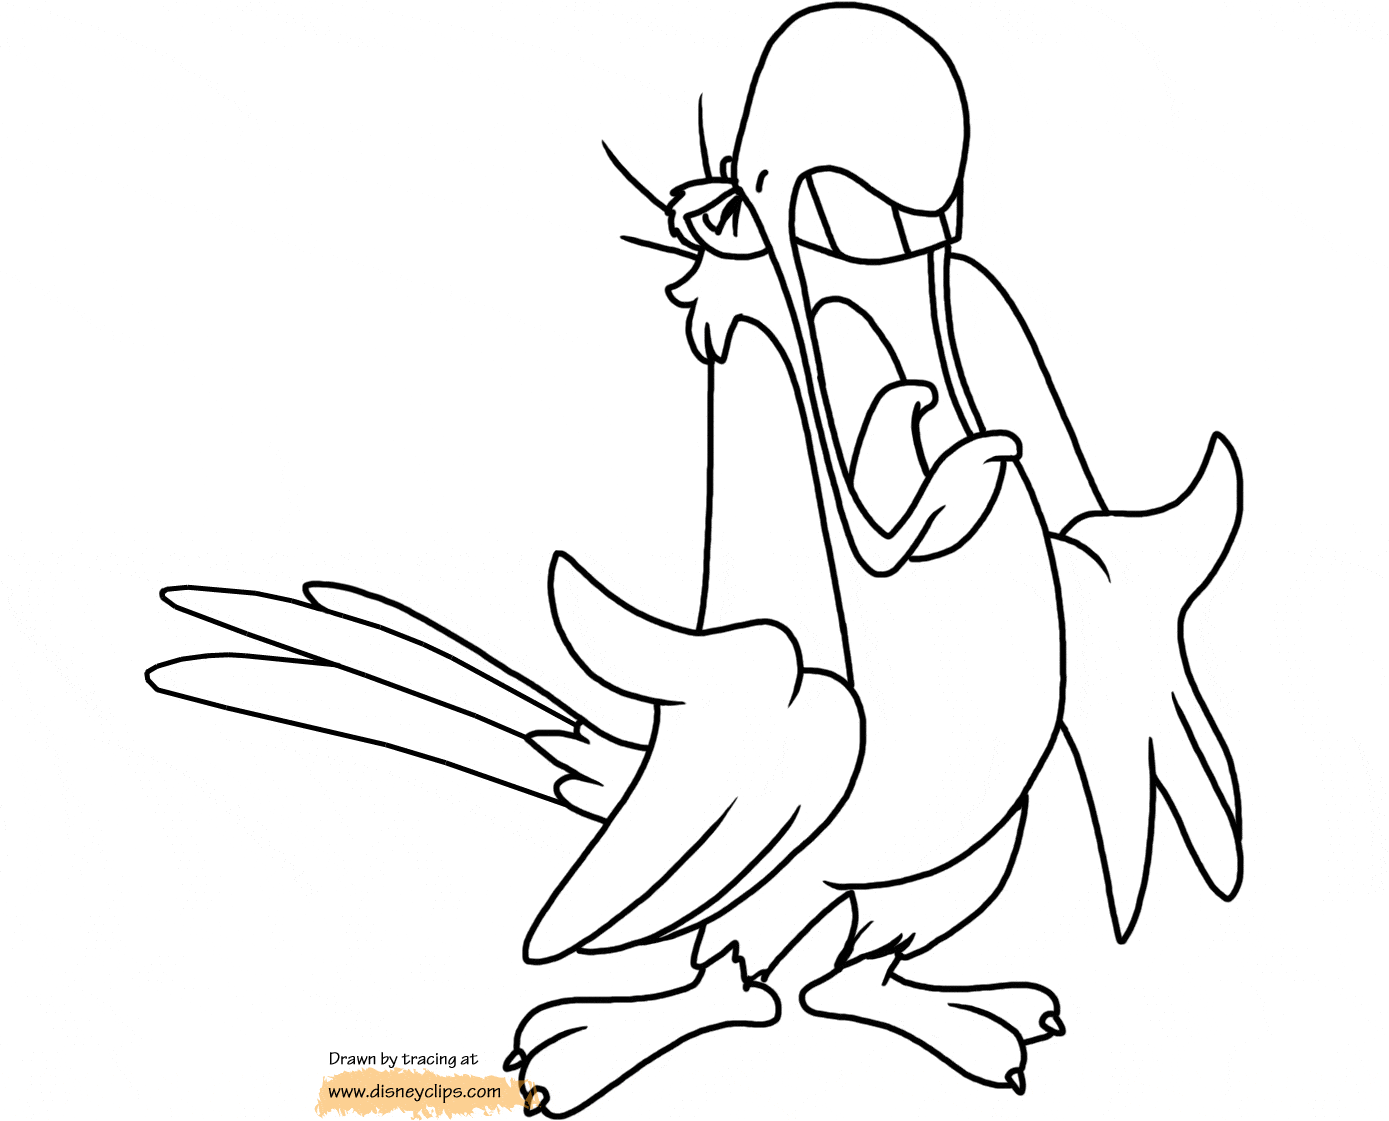 Jafars Parrot coloring page